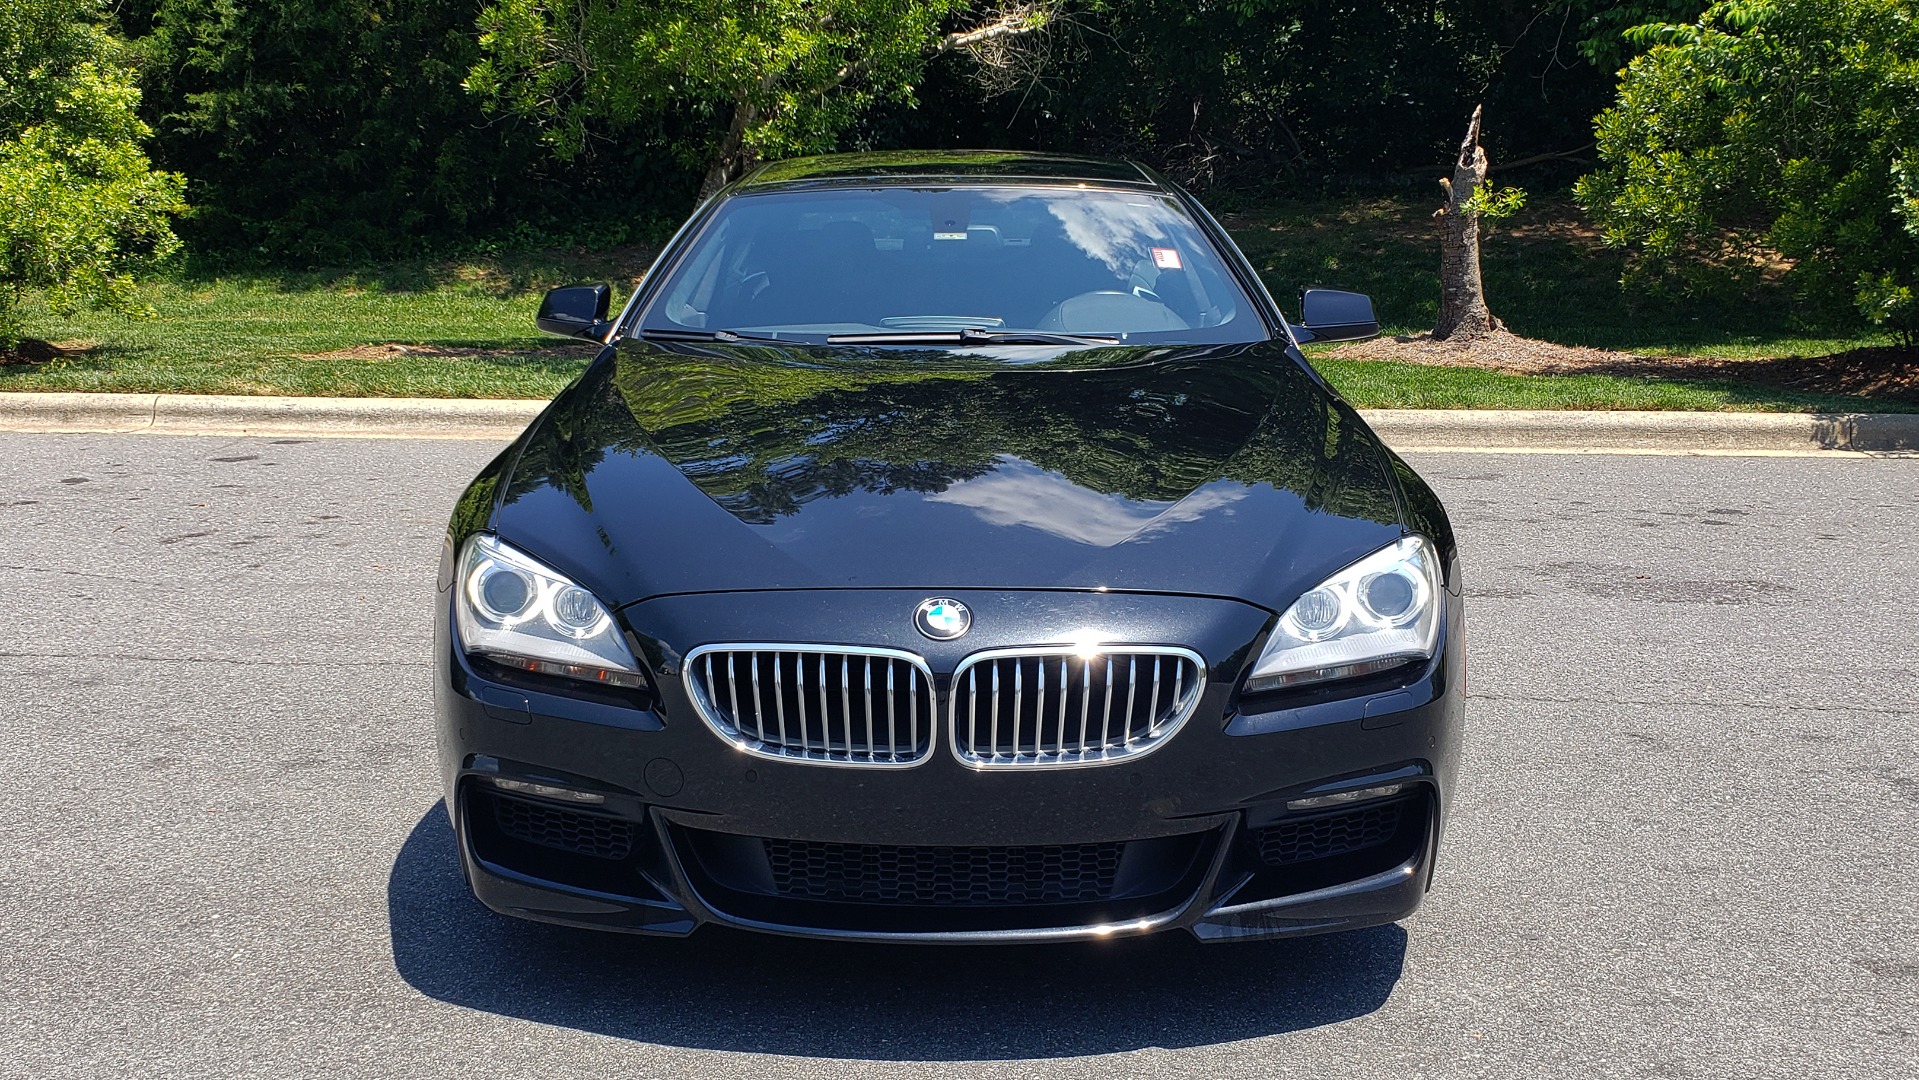 Used 2013 BMW 6 SERIES 650I GRANCOUPE / M-SPORT / LUXURY / NAV / SUNROOF / HTD STS for sale Sold at Formula Imports in Charlotte NC 28227 20